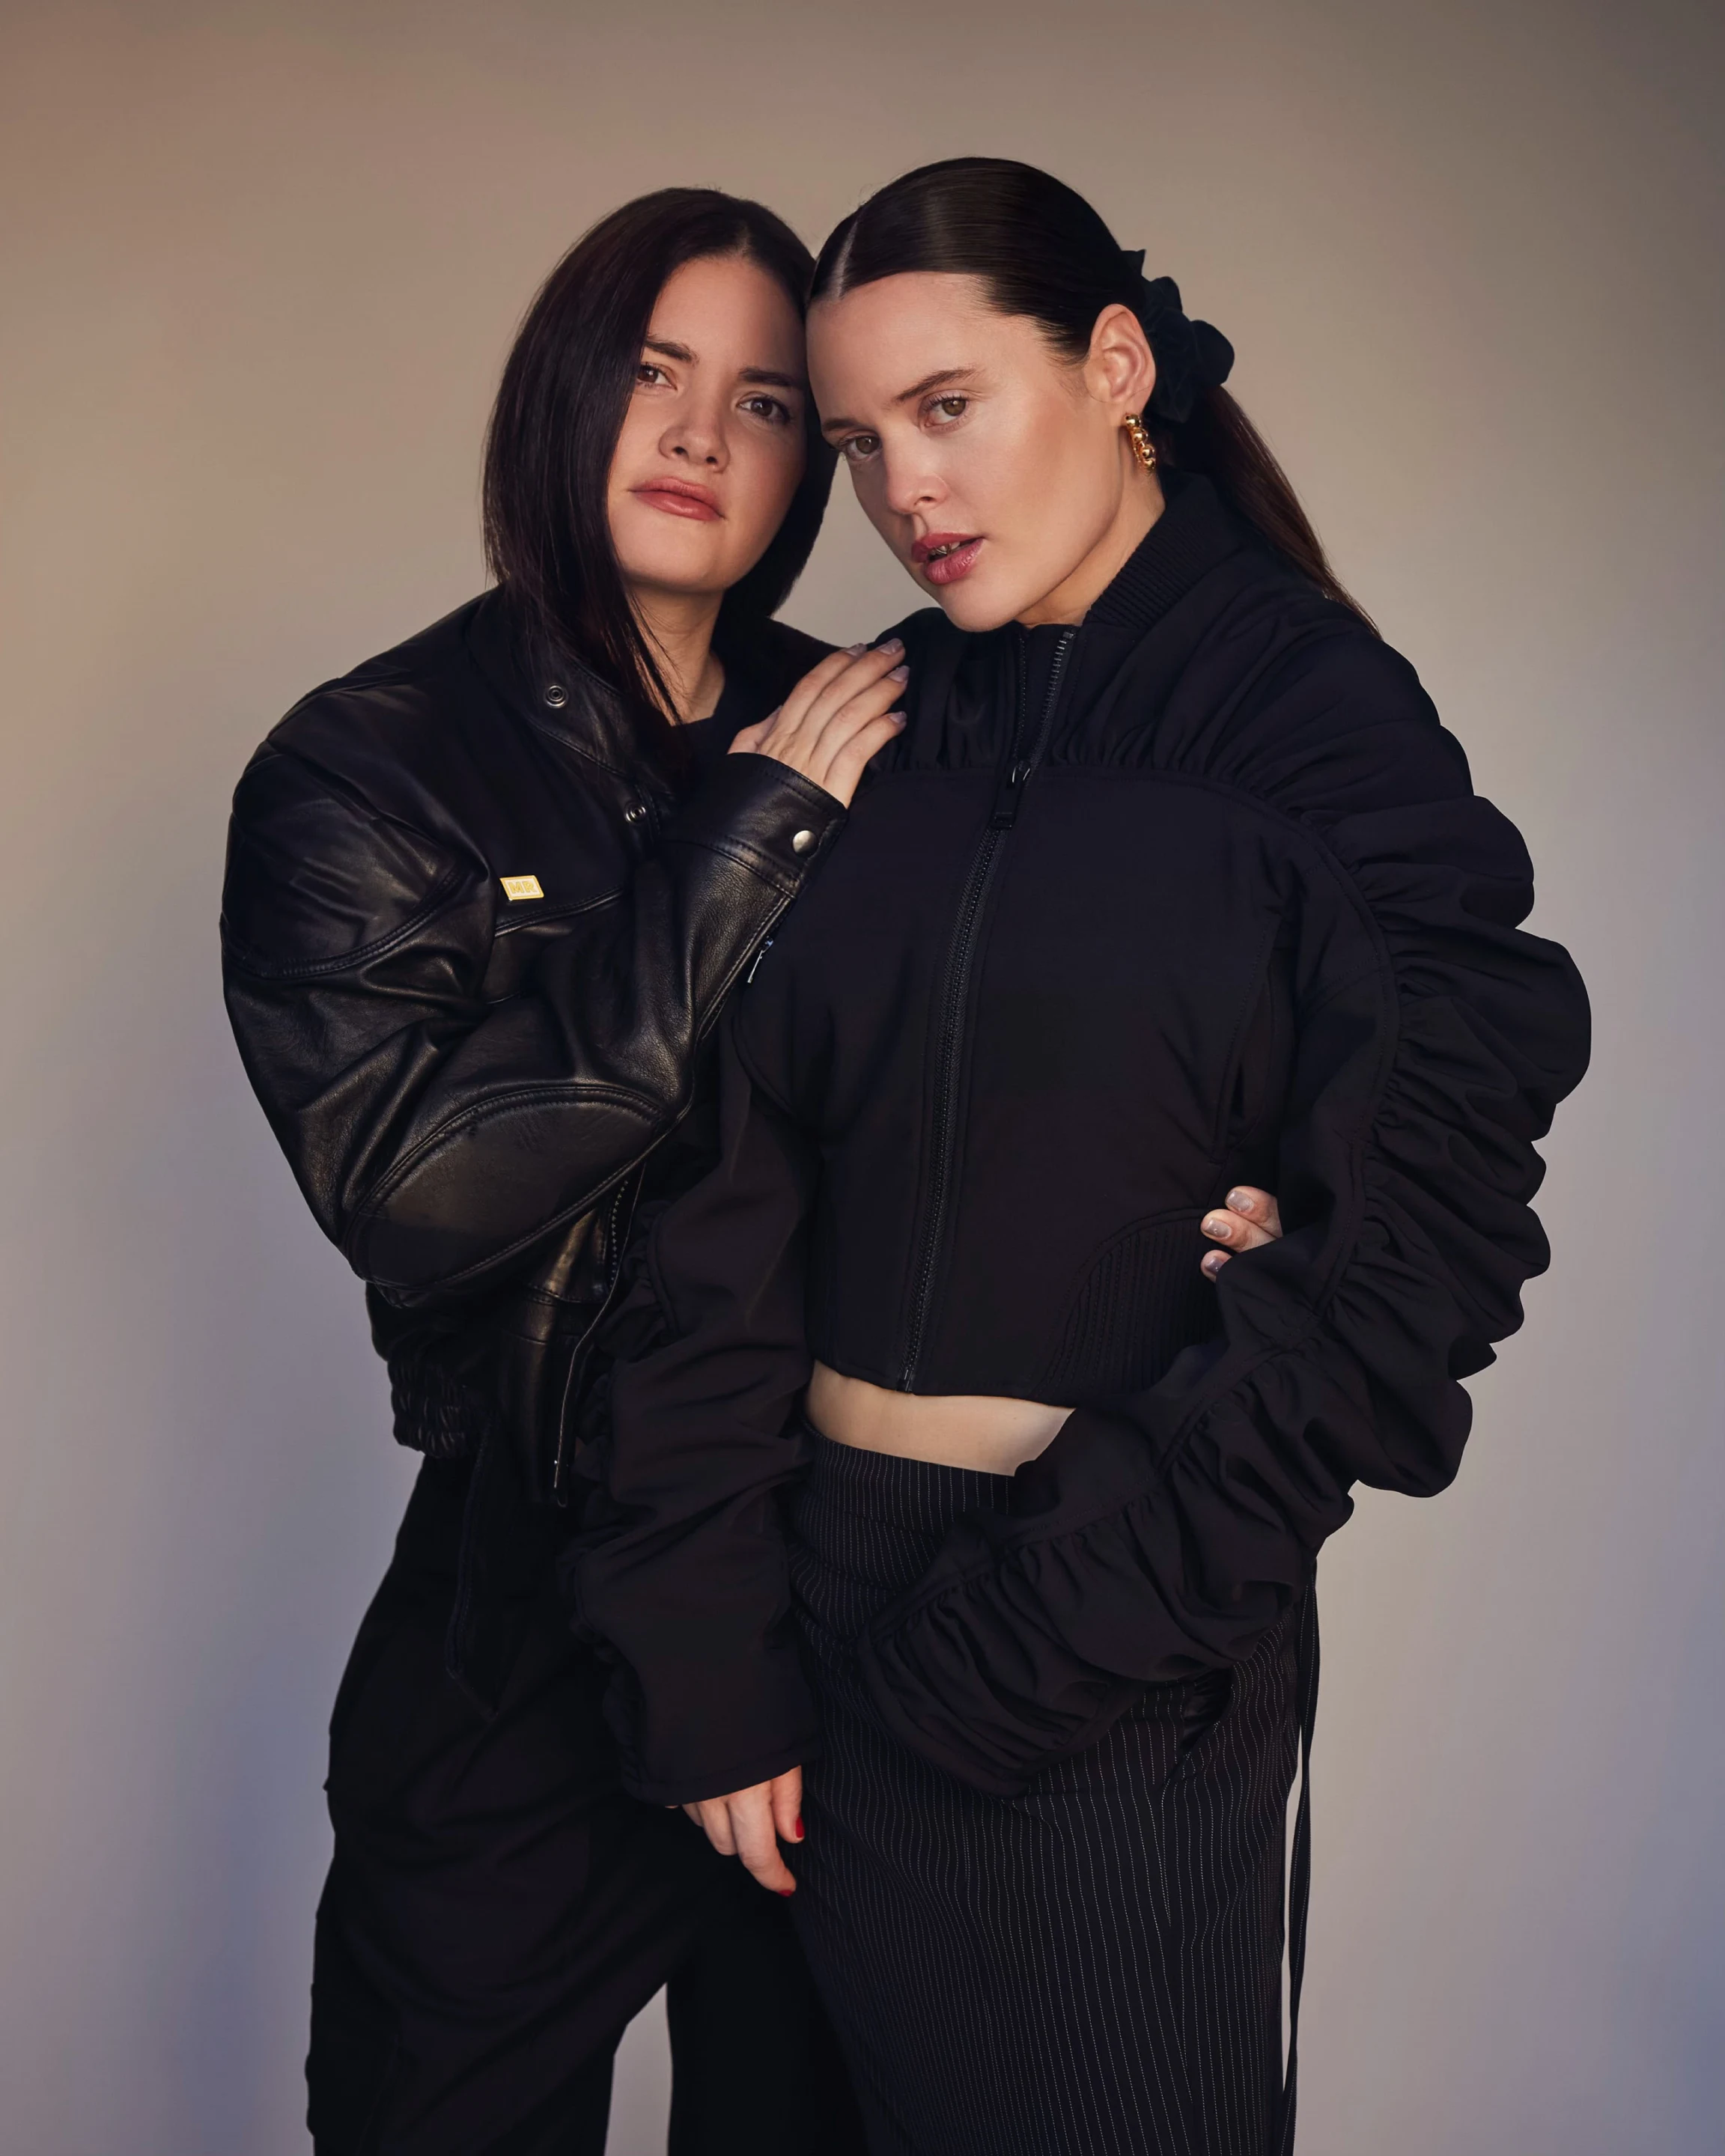 A portrait of celebrity stylists Chloe and Chenelle Delgadillo